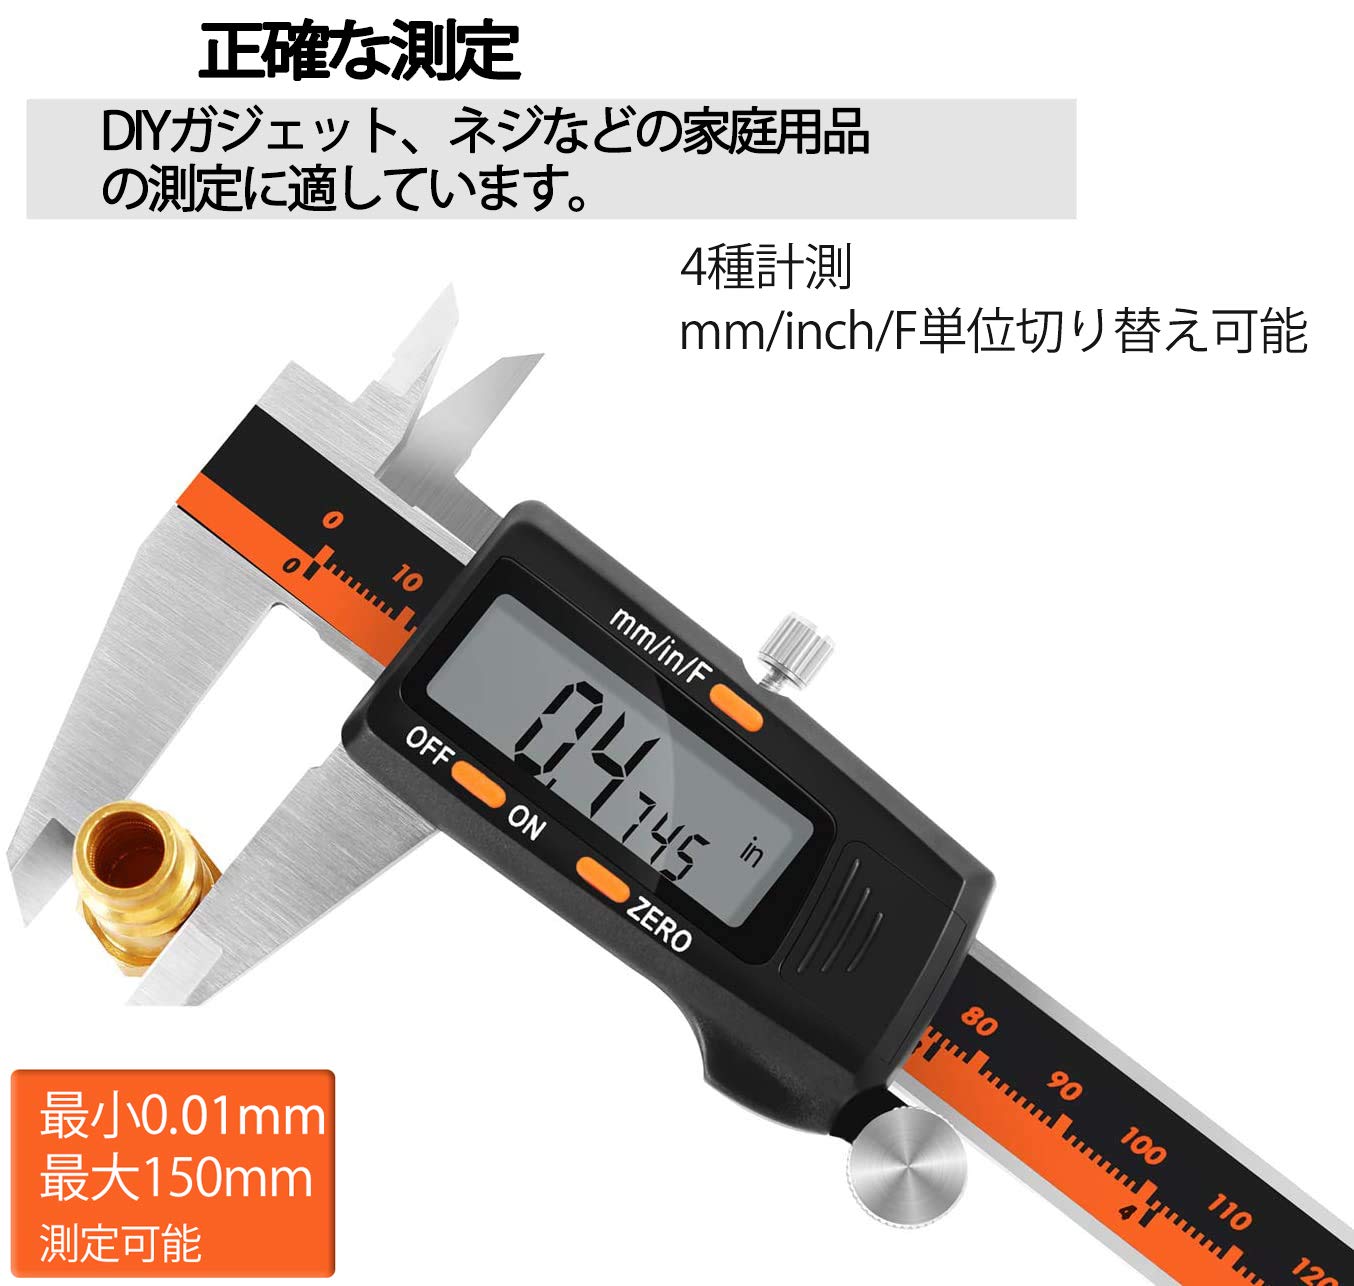 Spurtar digital vernier calipers 150mm stainless steel measurement tool inside diameter / outer diameter / depth / step difference measurement DIY high precision ... Impact-proof the smallest style possibility steel made liquid crystal flight 